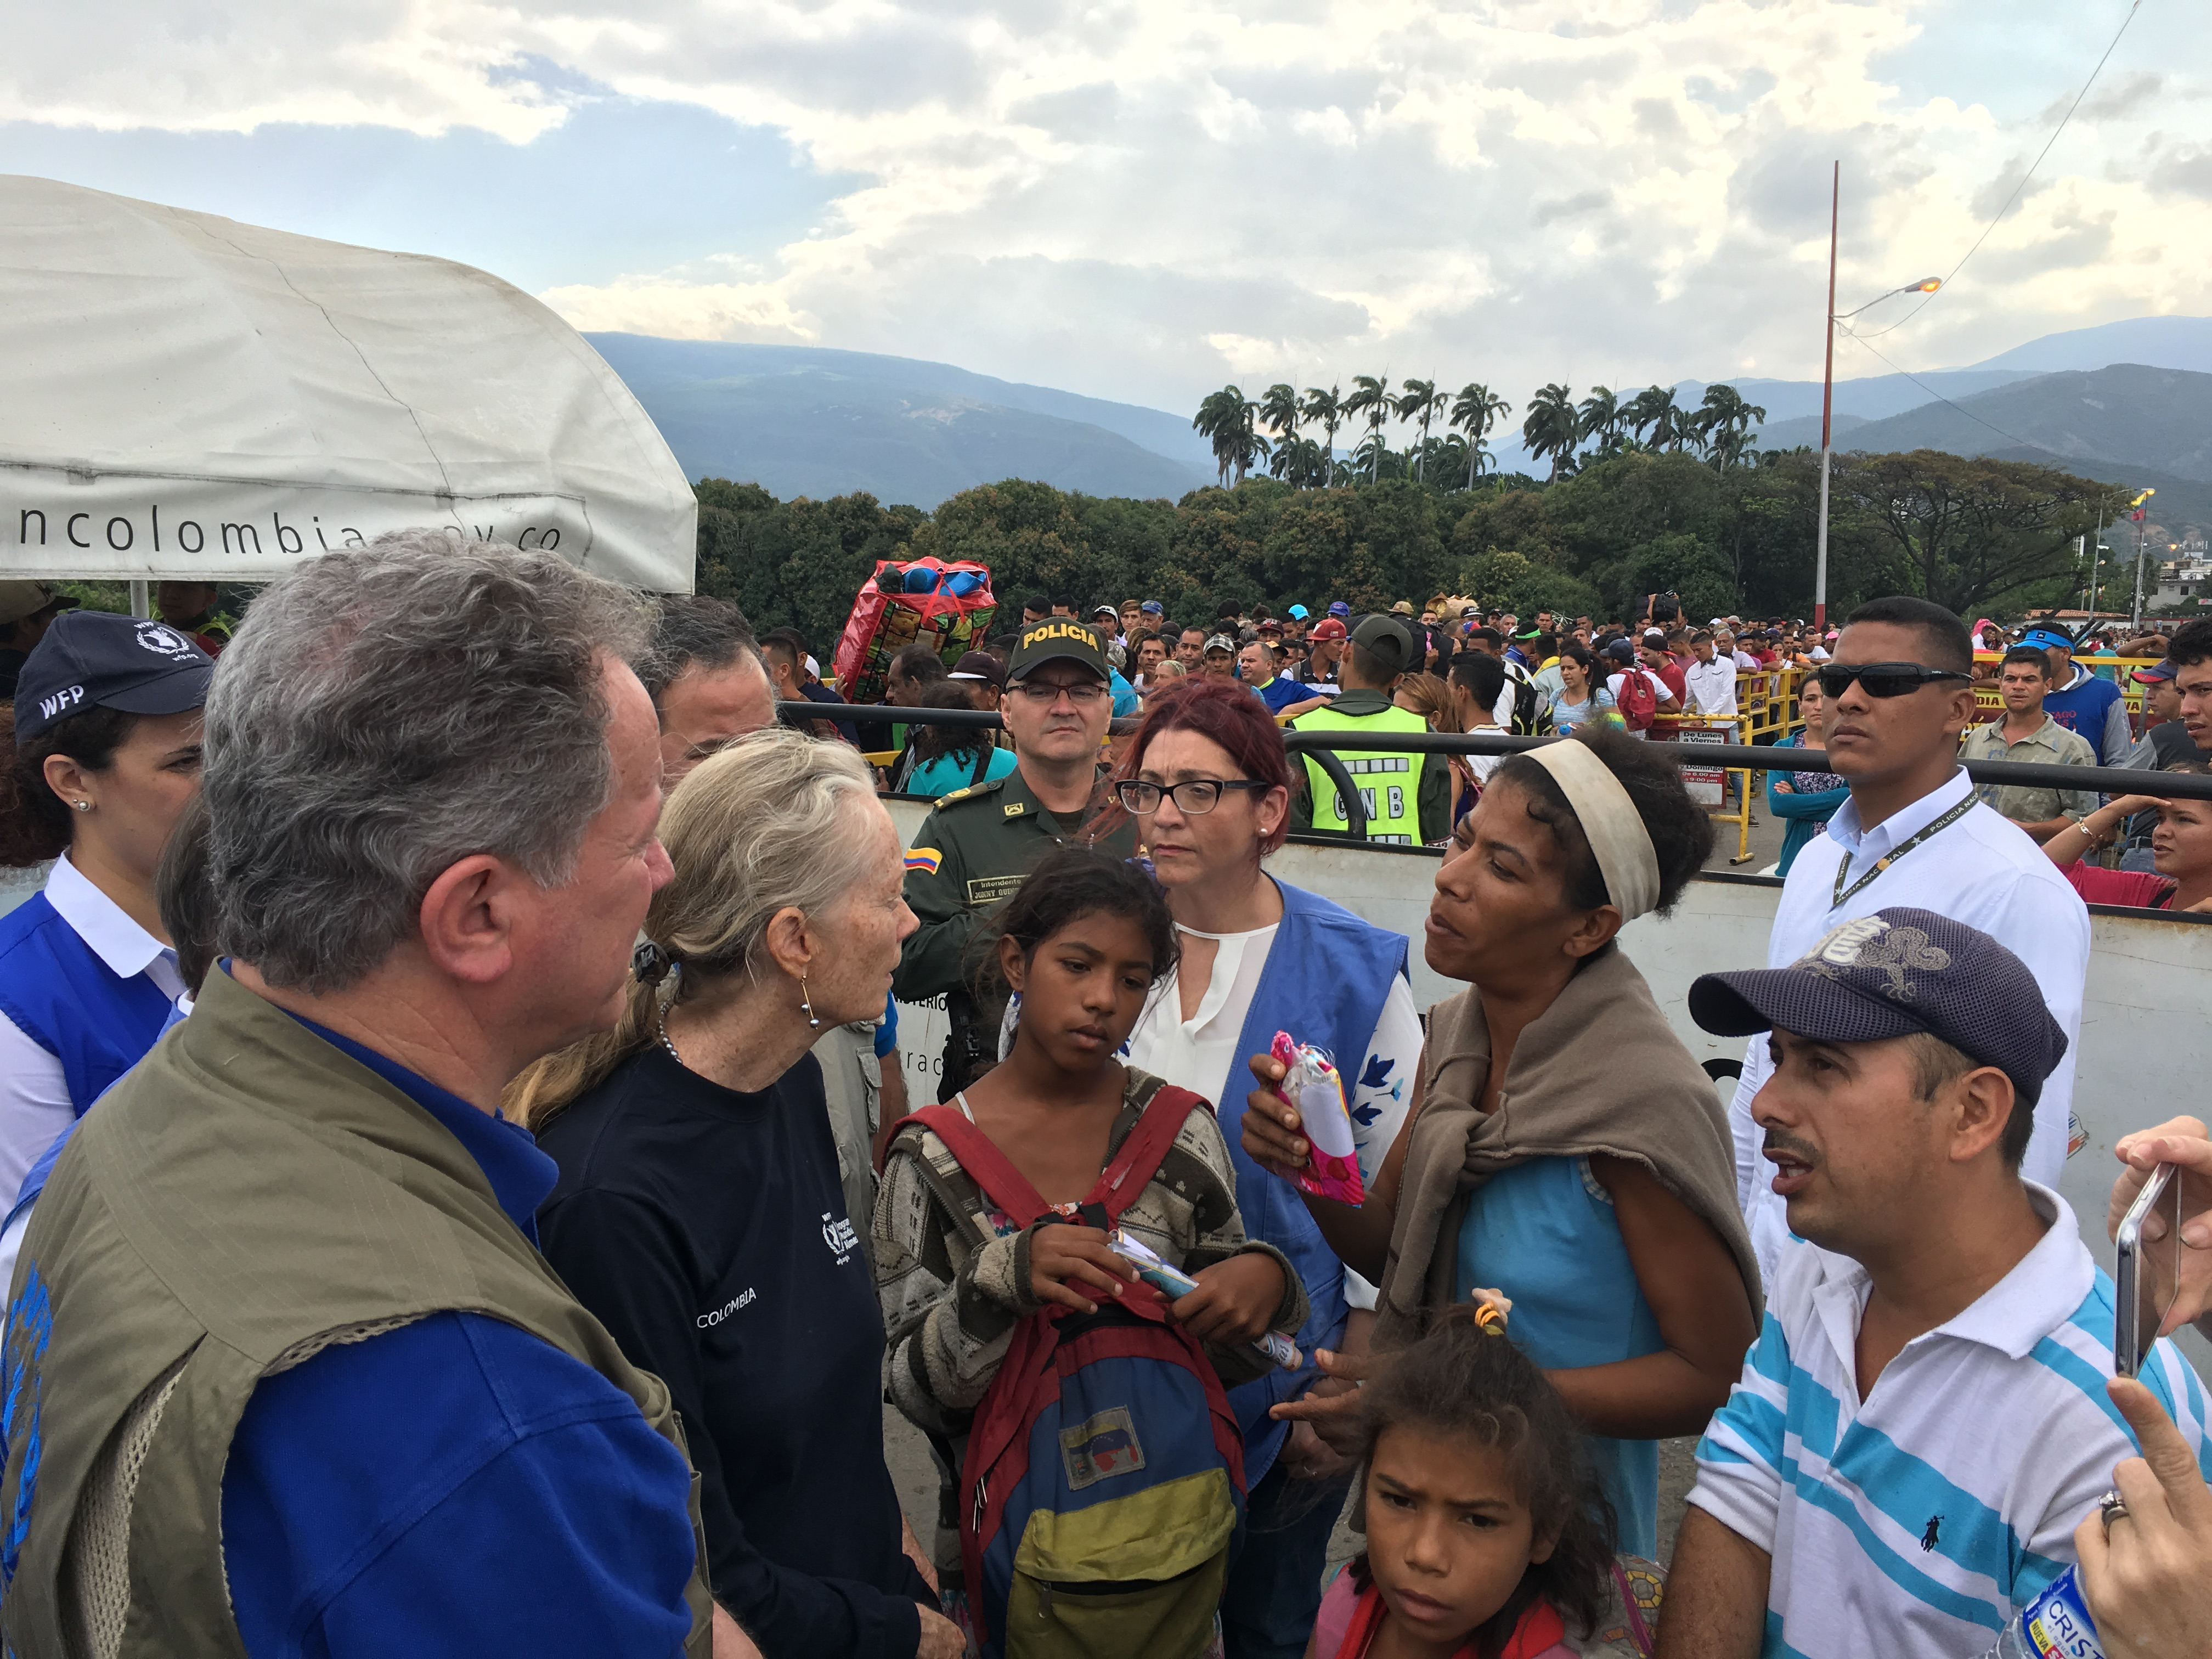 World Food Programme in Colombia needs US$46 million to urgently help 350,000 migrants from Venezuela